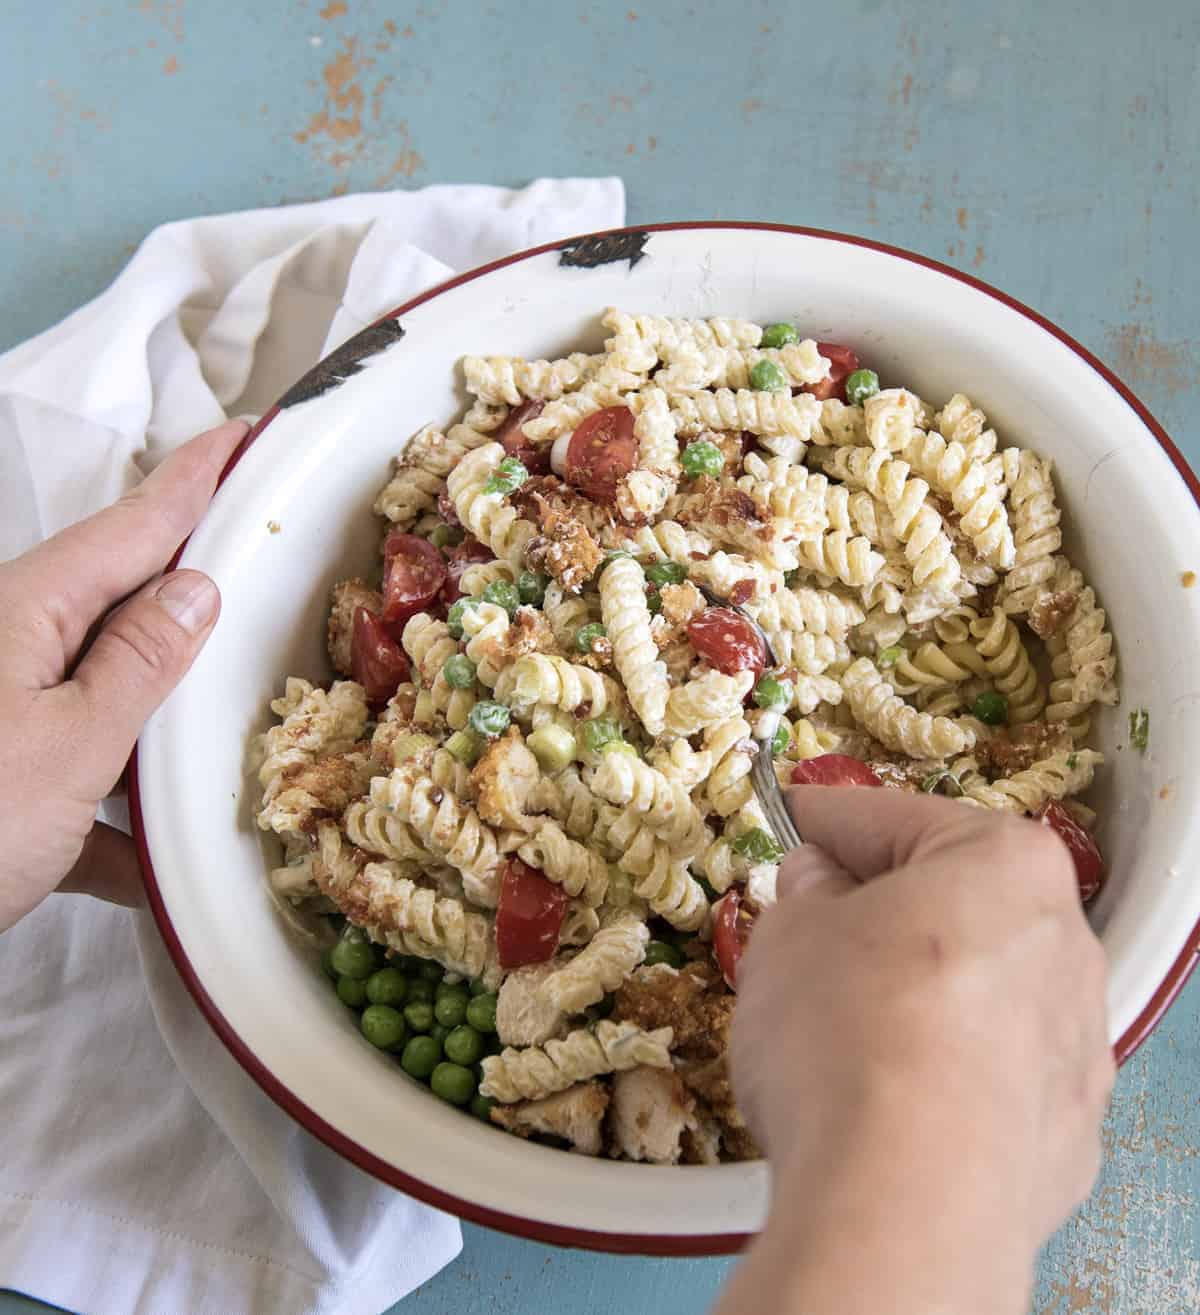 Chicken Bacon Ranch Pasta Salad is our favorite pasta salad recipe that comes together in about 20 minutes and the whole family loves it.